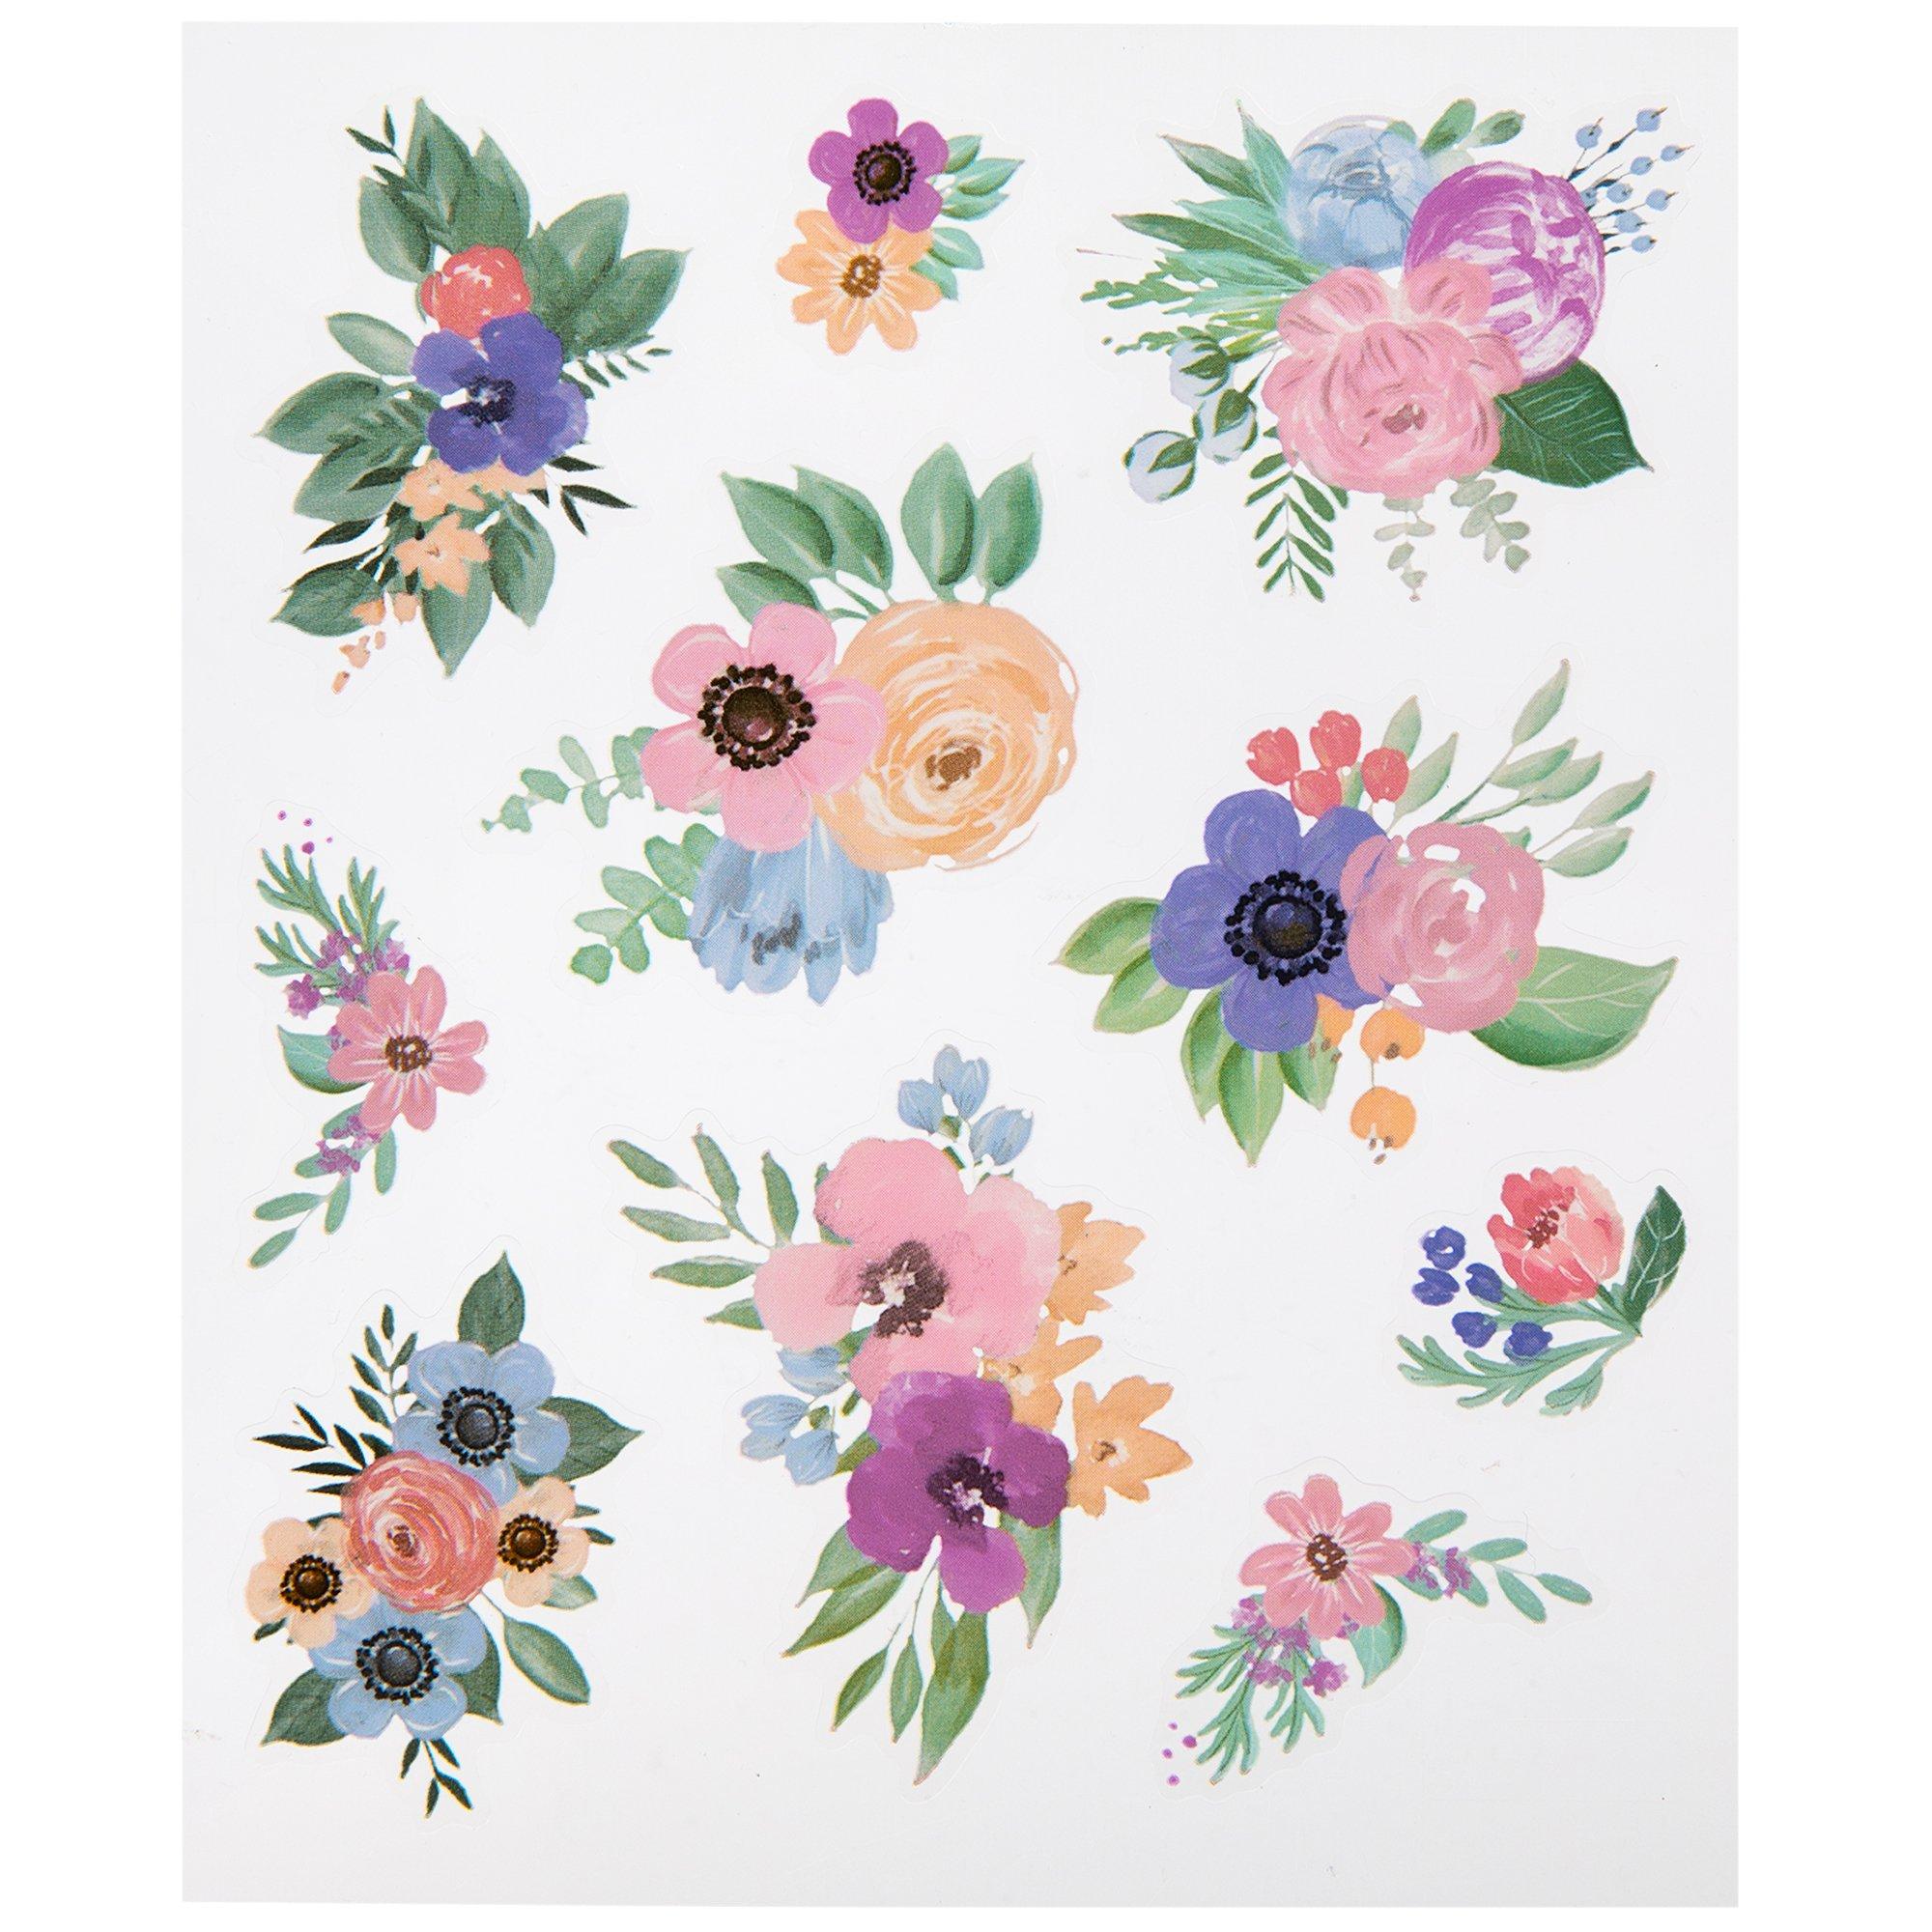 46 Pcs purple Flower Stickers Self-Adhesive Pretty Floral Stickers Stickers  For Scrapbooking Greeting Card Making